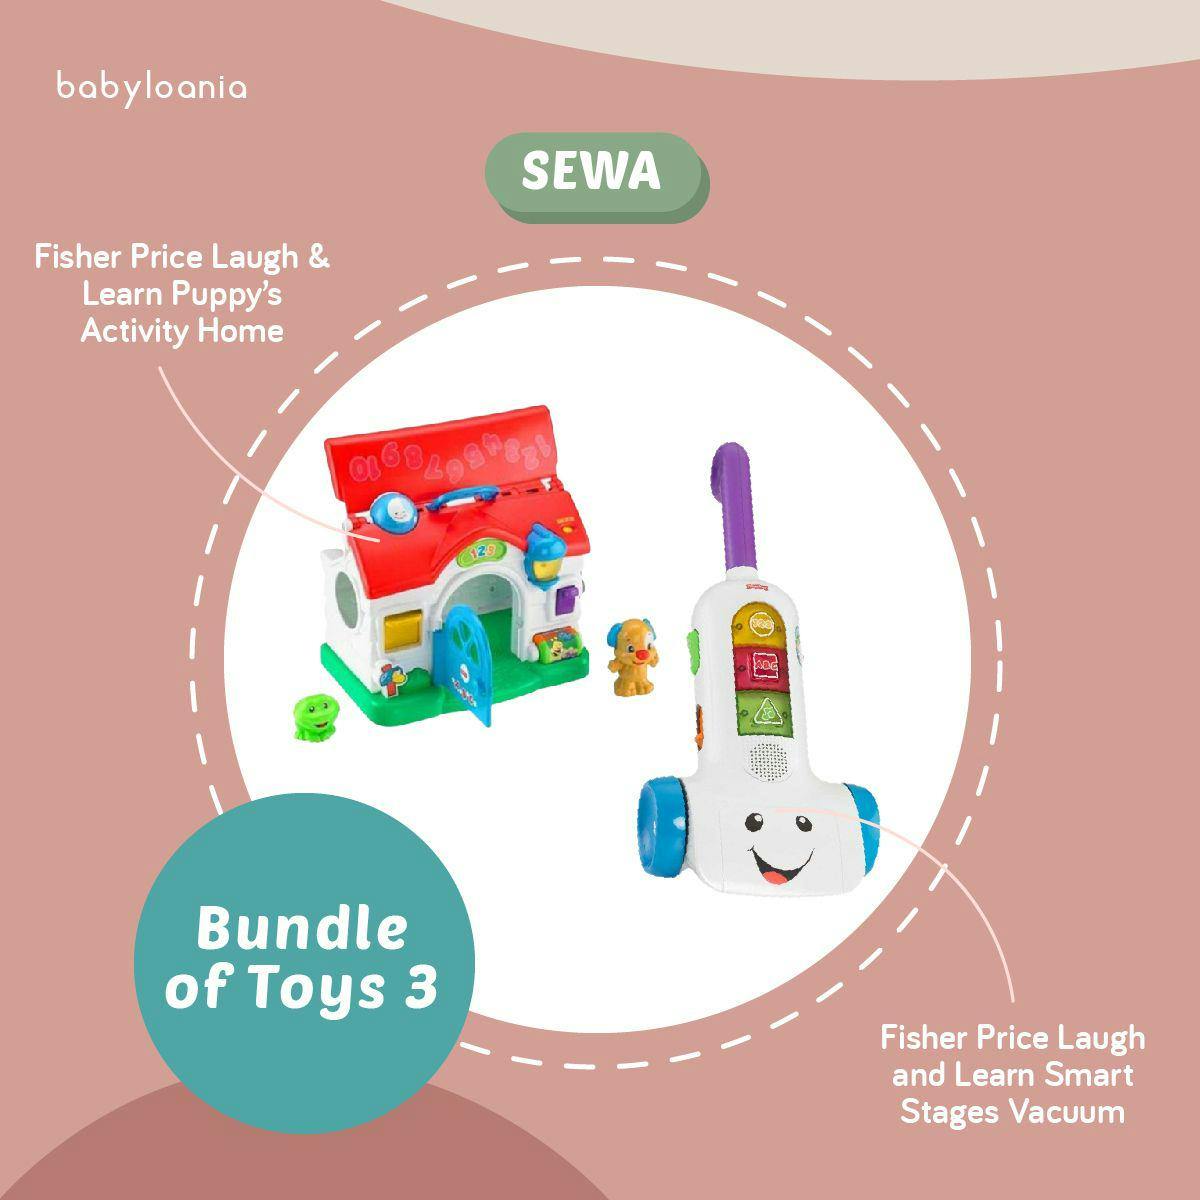 Bundle of Toys 3 (Fisher Price Laugh & Learn Puppy’s Activity Home + Fisher Price Laugh and Learn Smart Stages Vacuum)